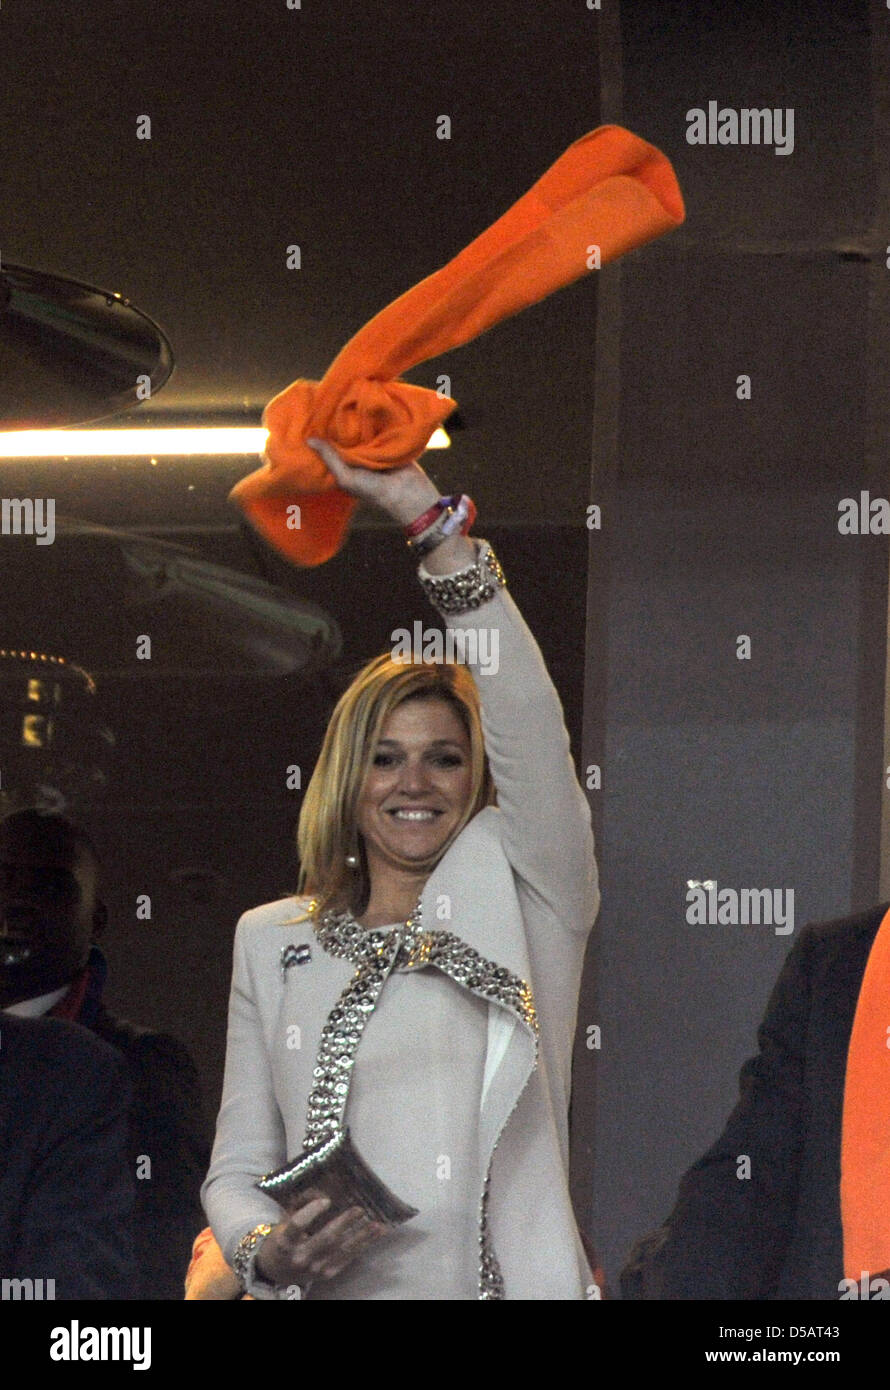 Netherland's Princess Maxima on the stand during the 2010 FIFA World Cup  final match between the Netherlands and Spain at Soccer City Stadium in  Johannesburg, South Africa 11 July 2010. Photo: Marcus